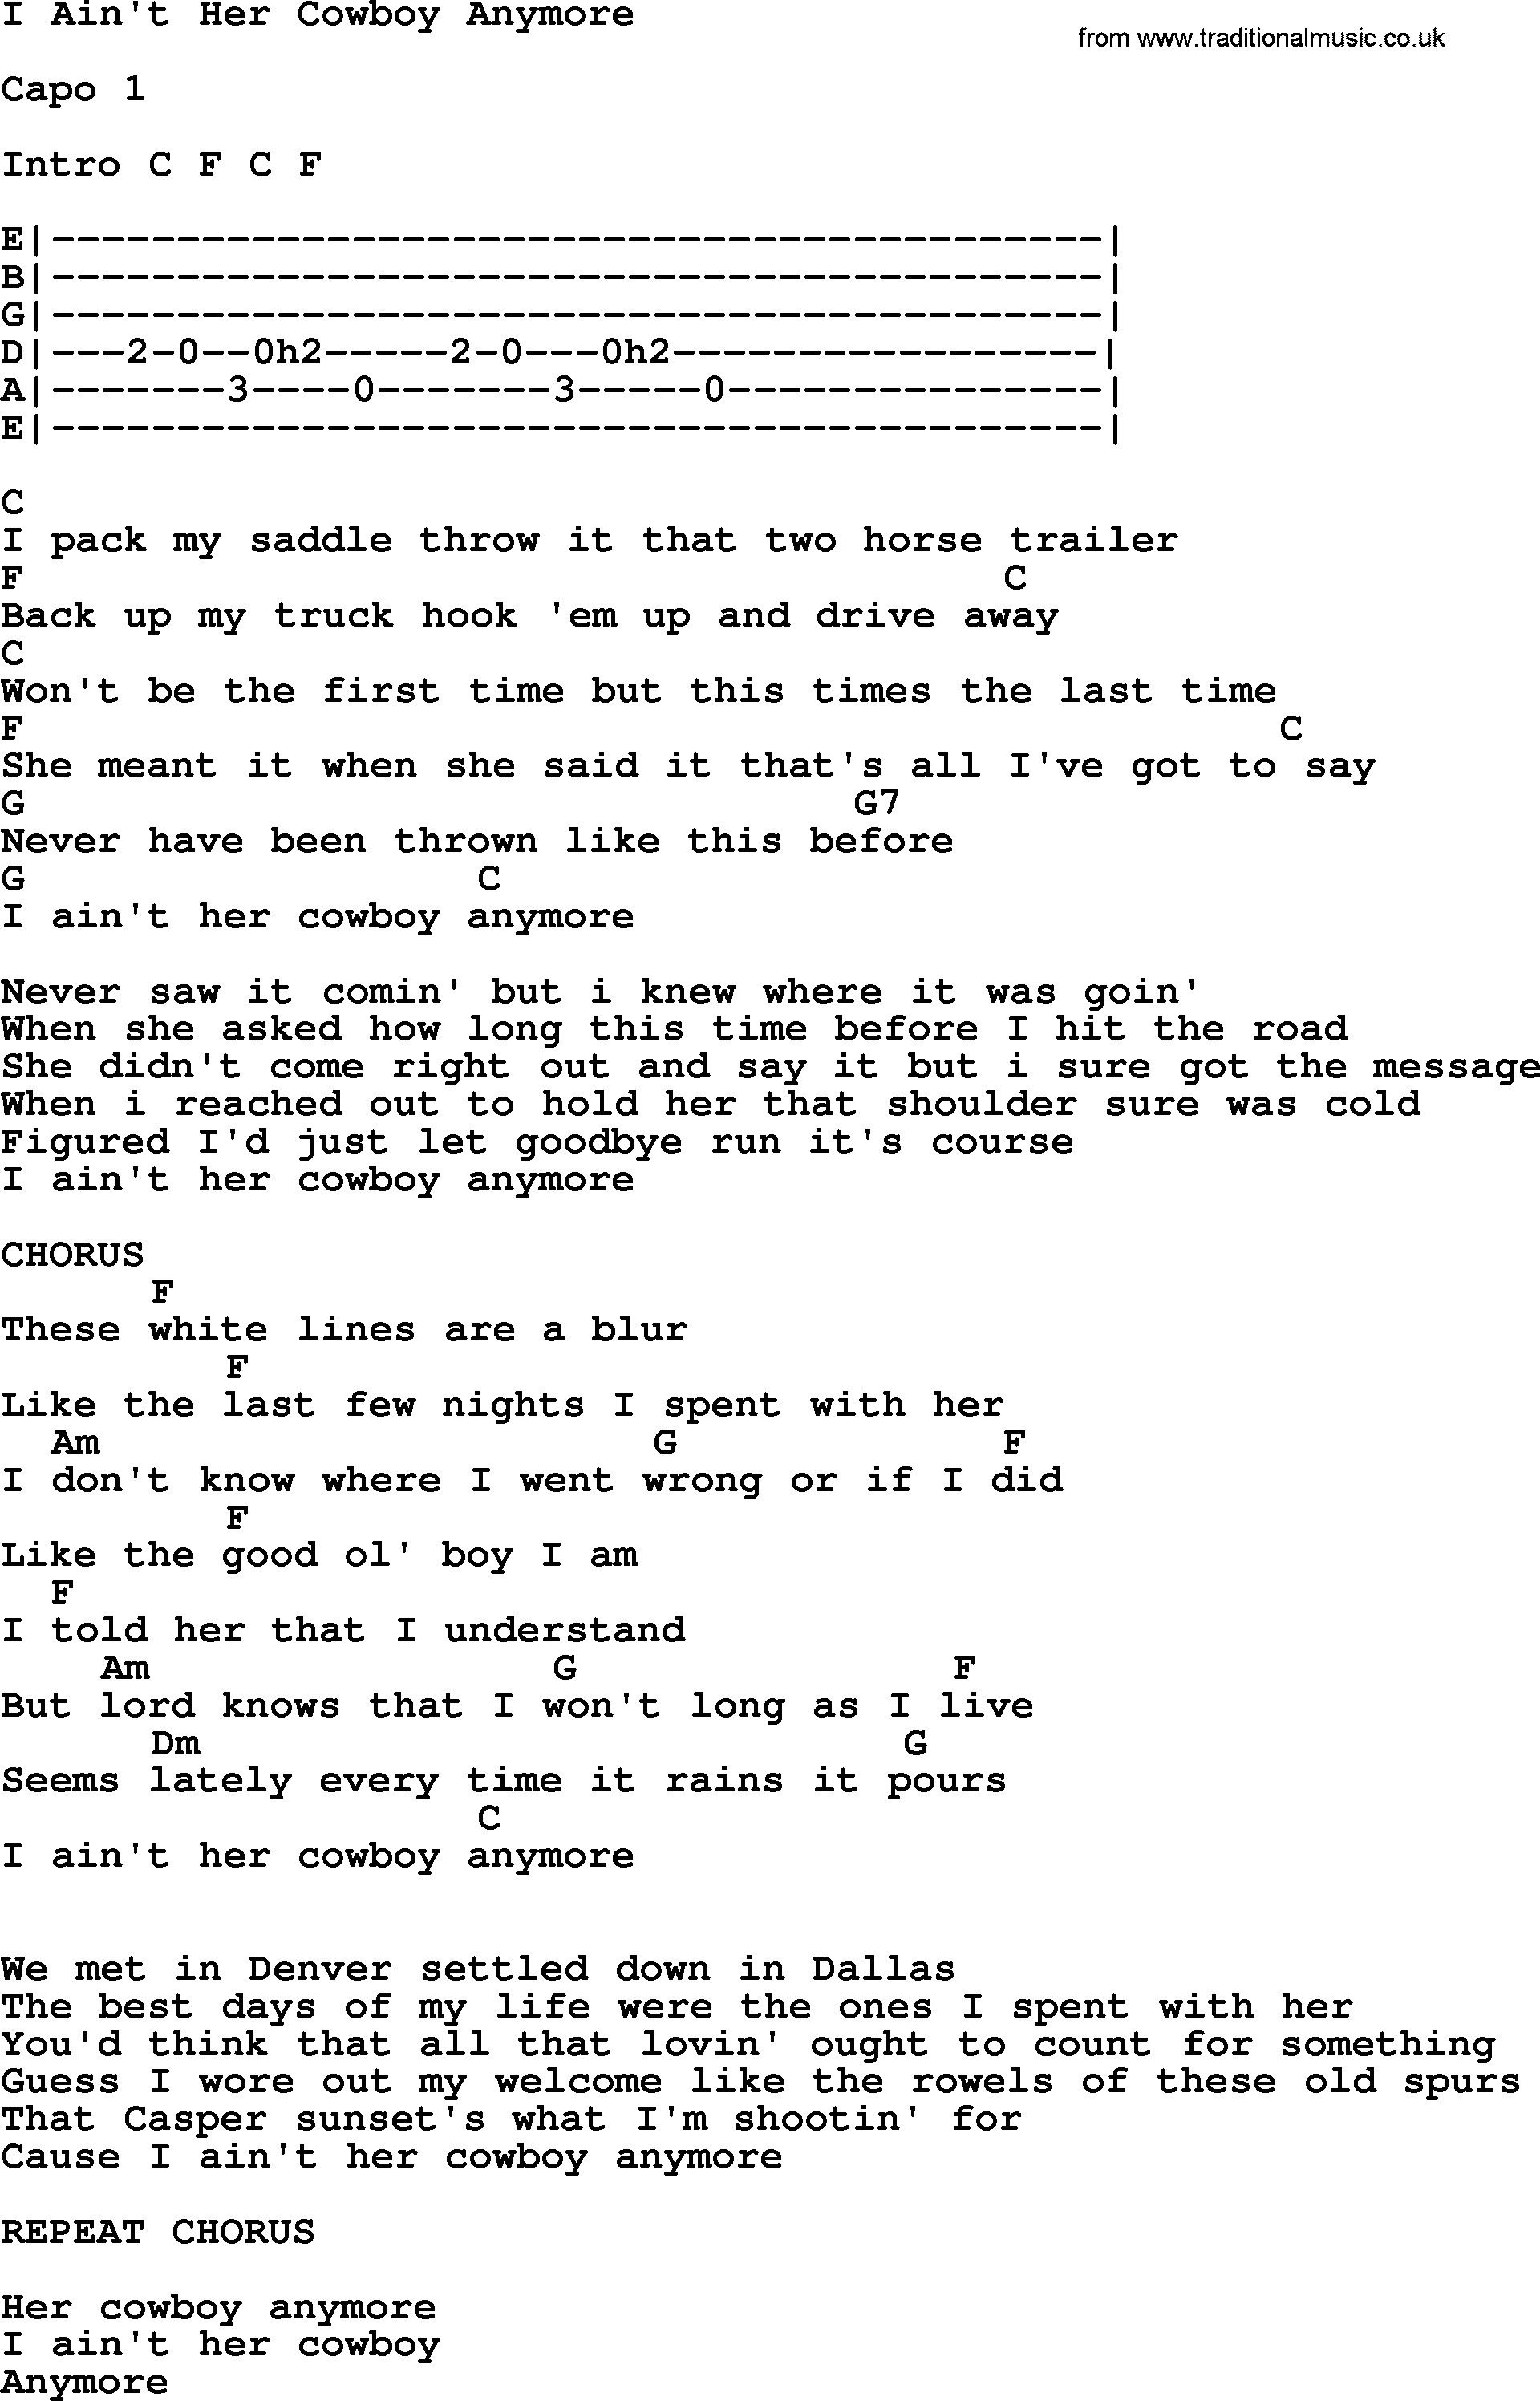 George Strait song: I Ain't Her Cowboy Anymore, lyrics and chords